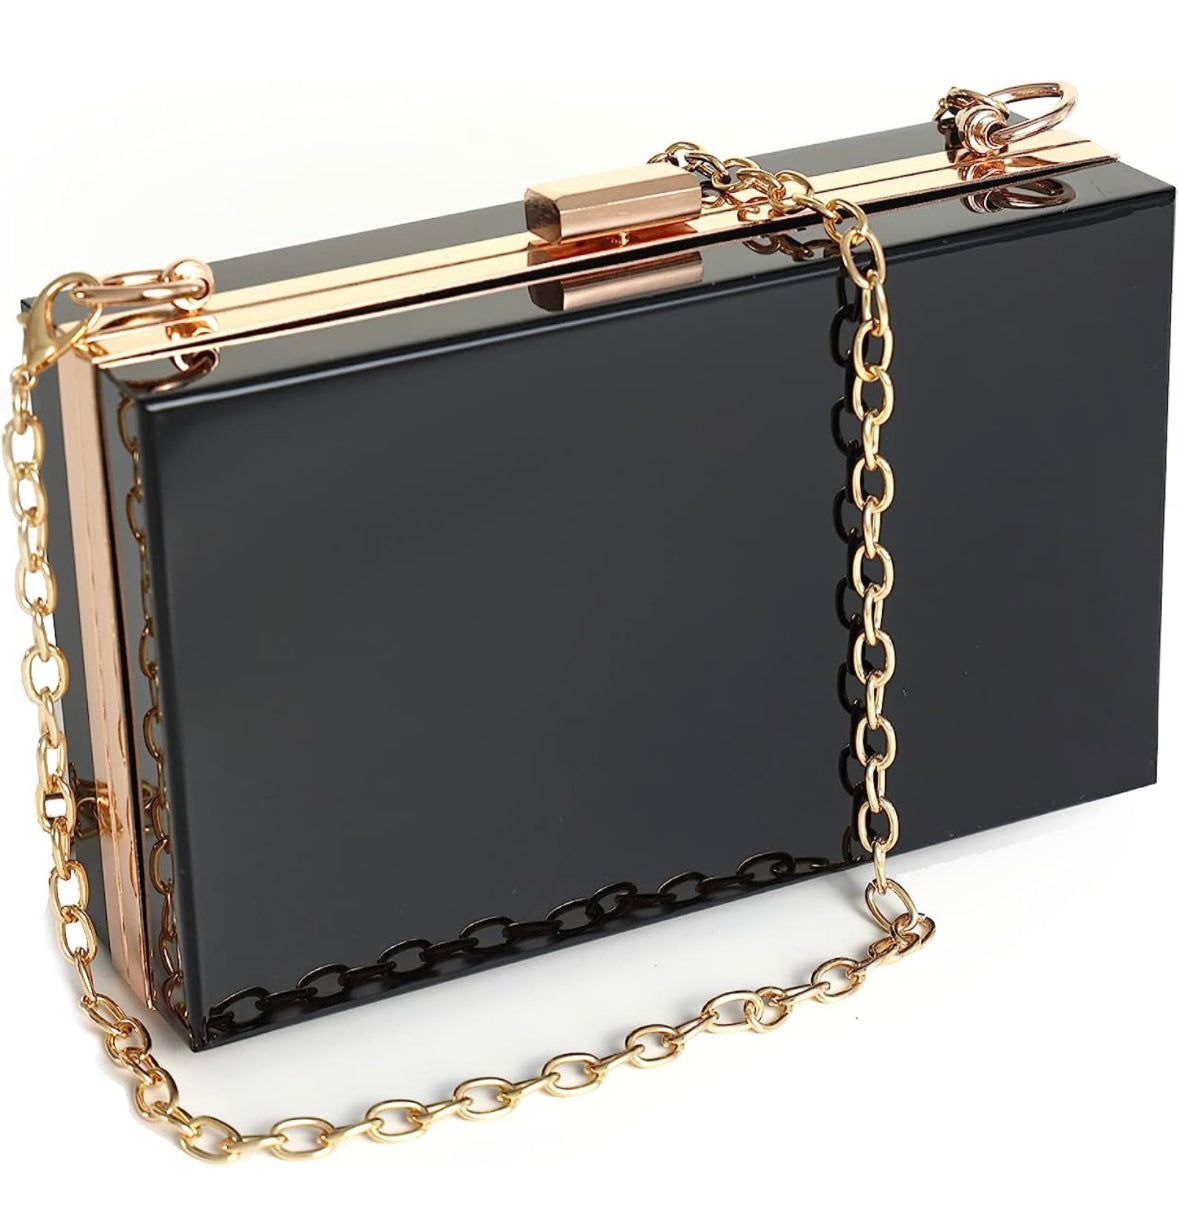 DST Acrylic Clutch Purse Dual Image - Front & Back